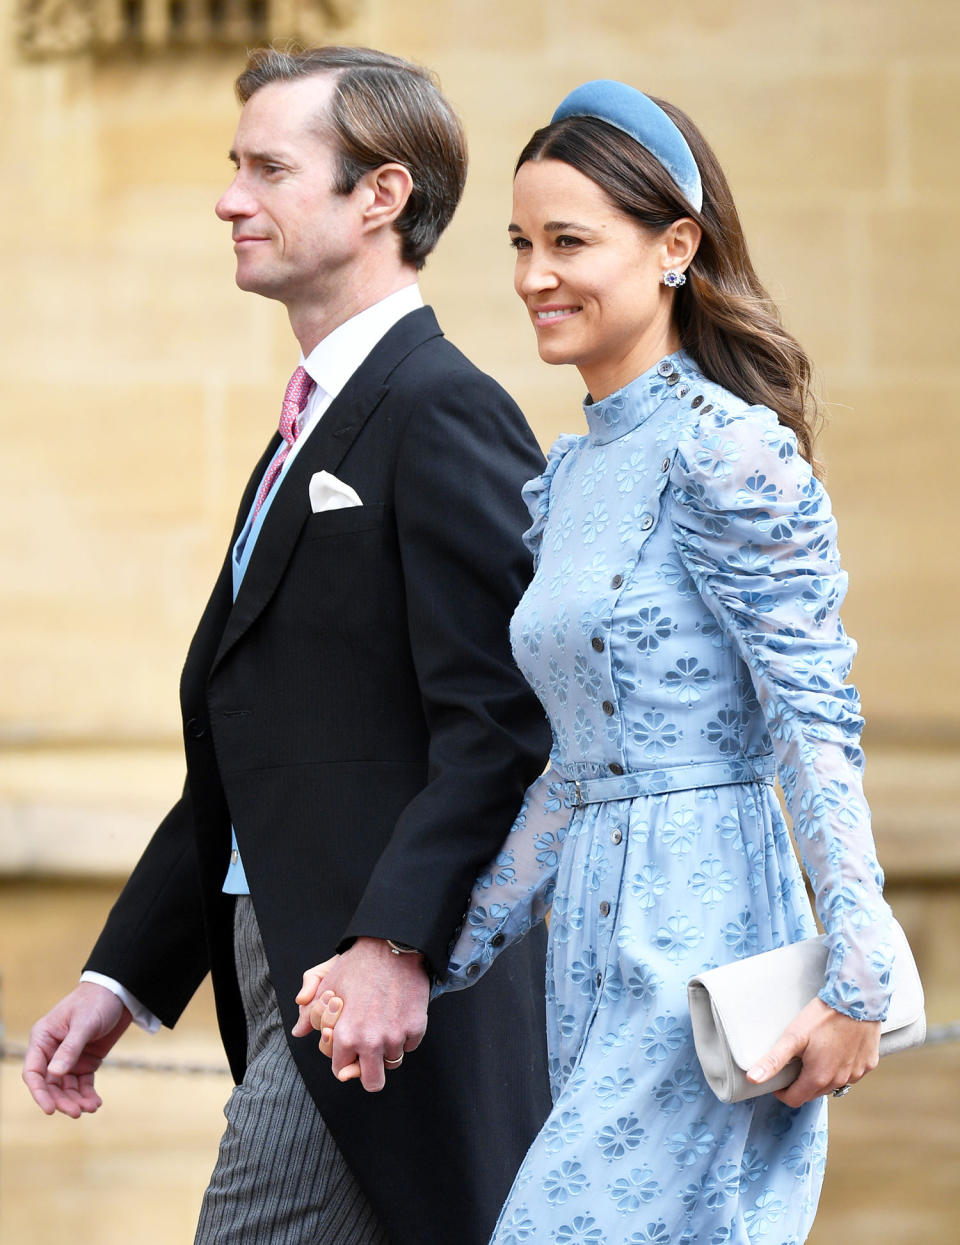 James Matthews and Pippa Middleton (Max Mumby / Getty Images)